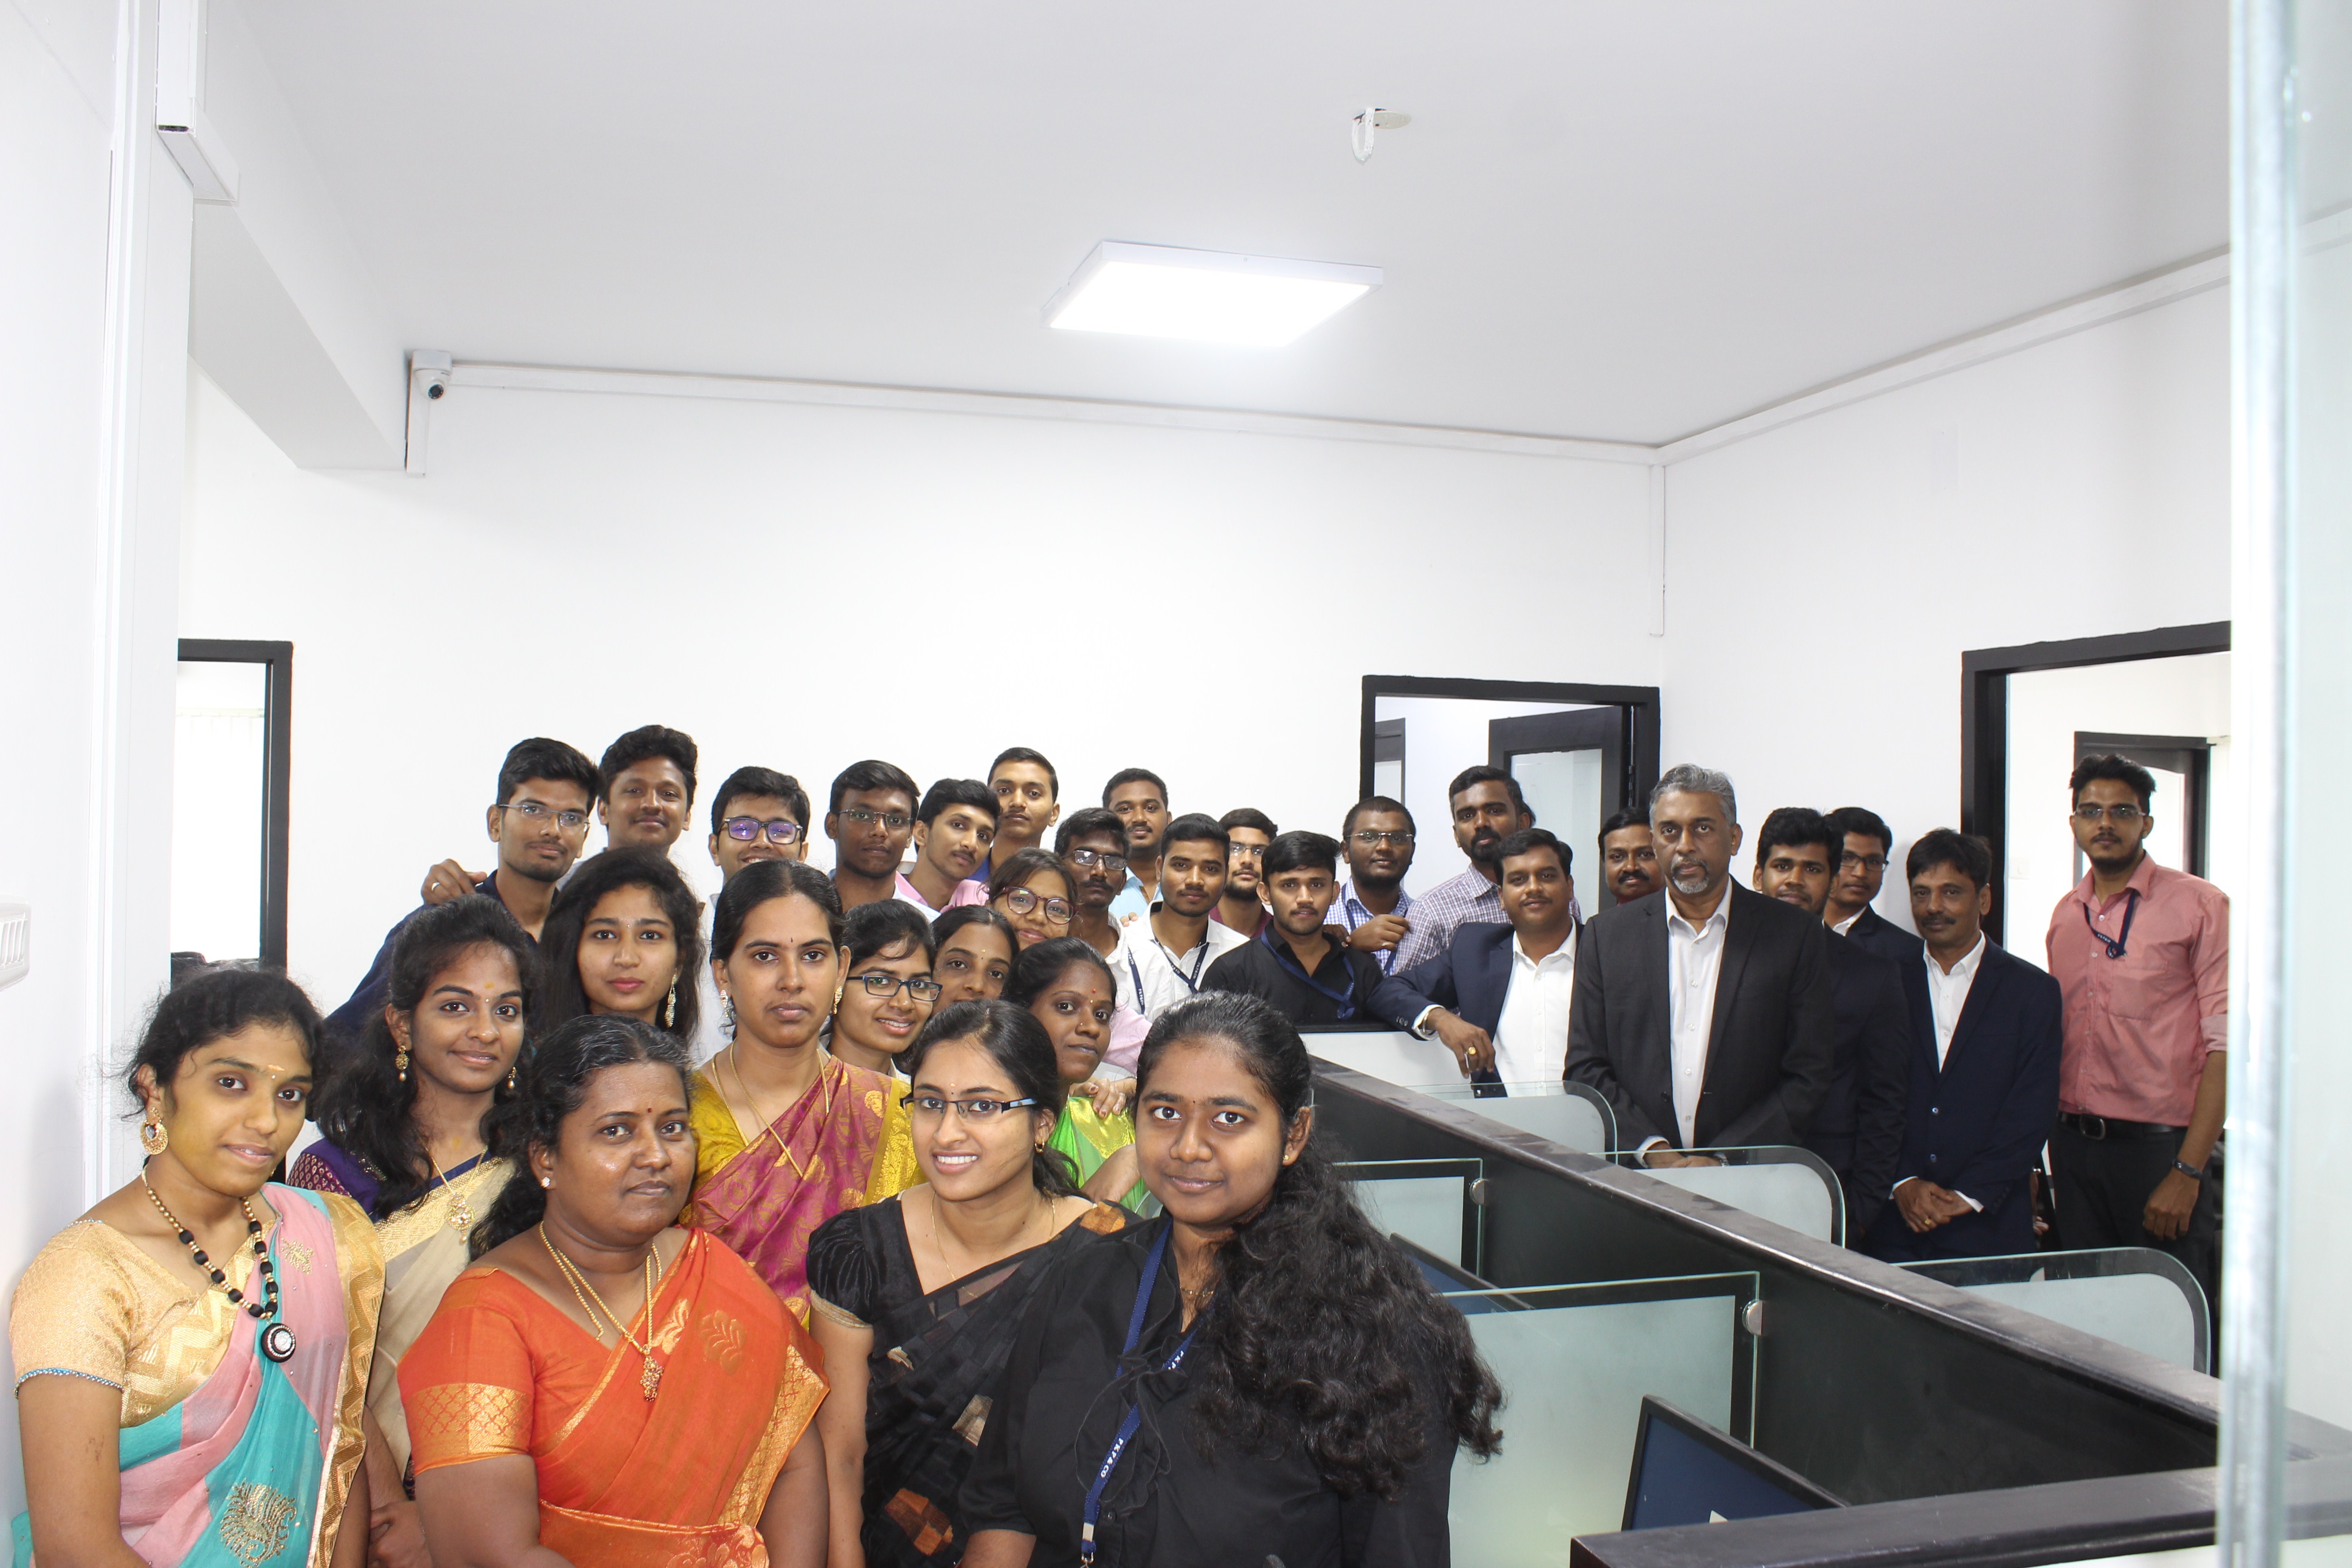 5th February, 2019 - Additional Office premise inaugral ceremony